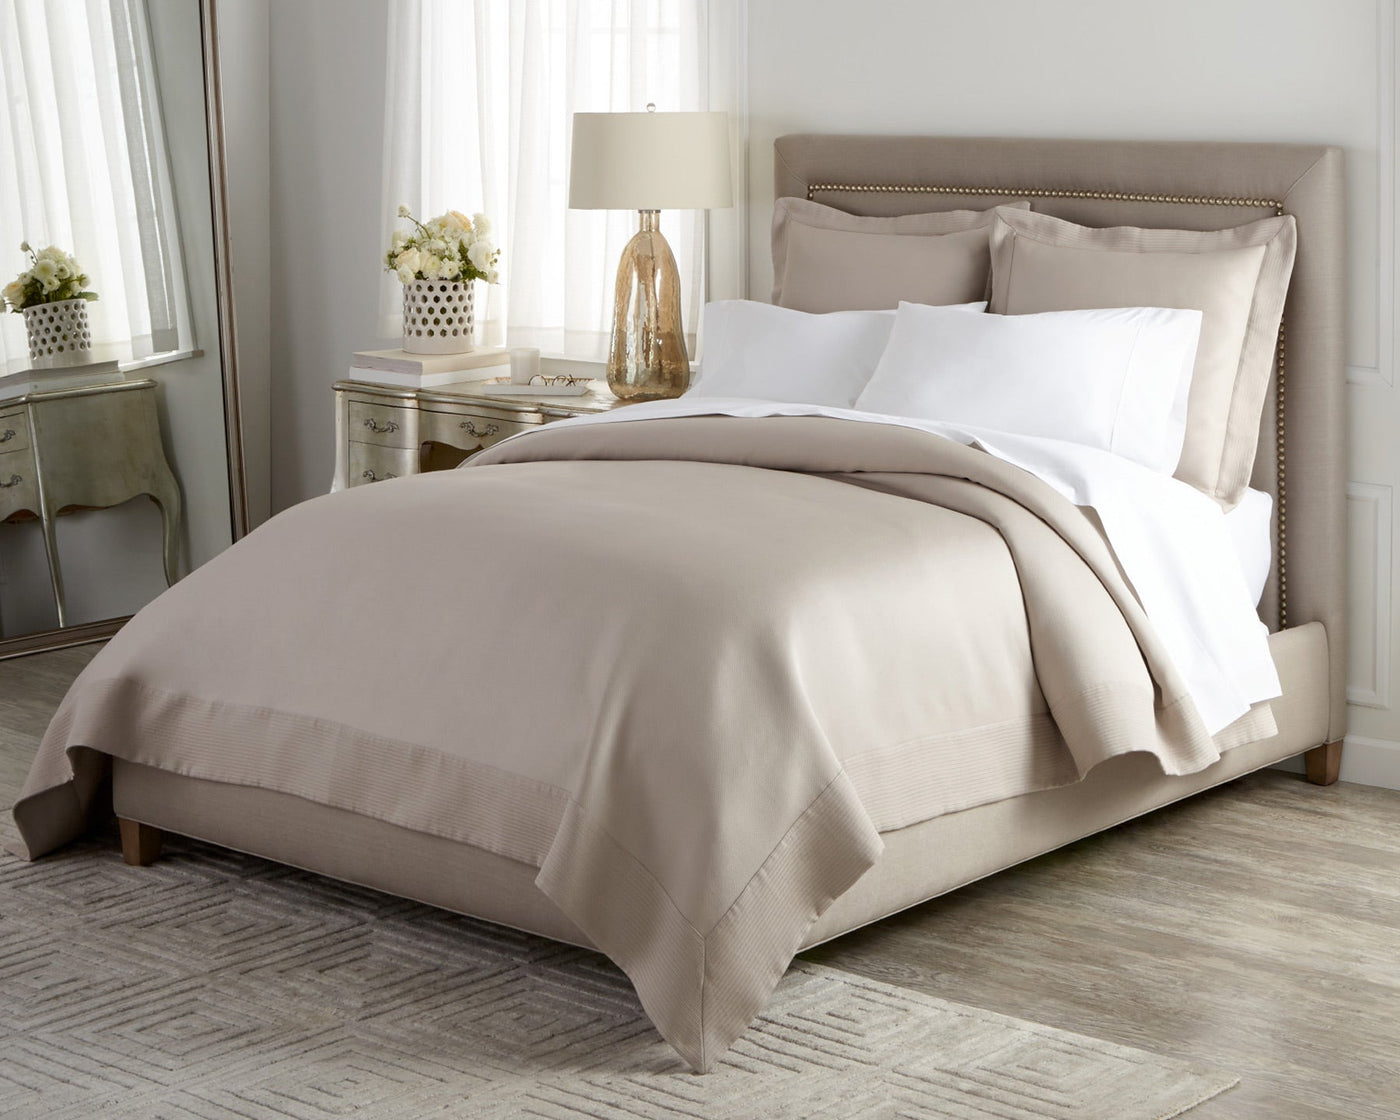 100% cotton pique Angelina coverlet and shams in linen on comfortable bed